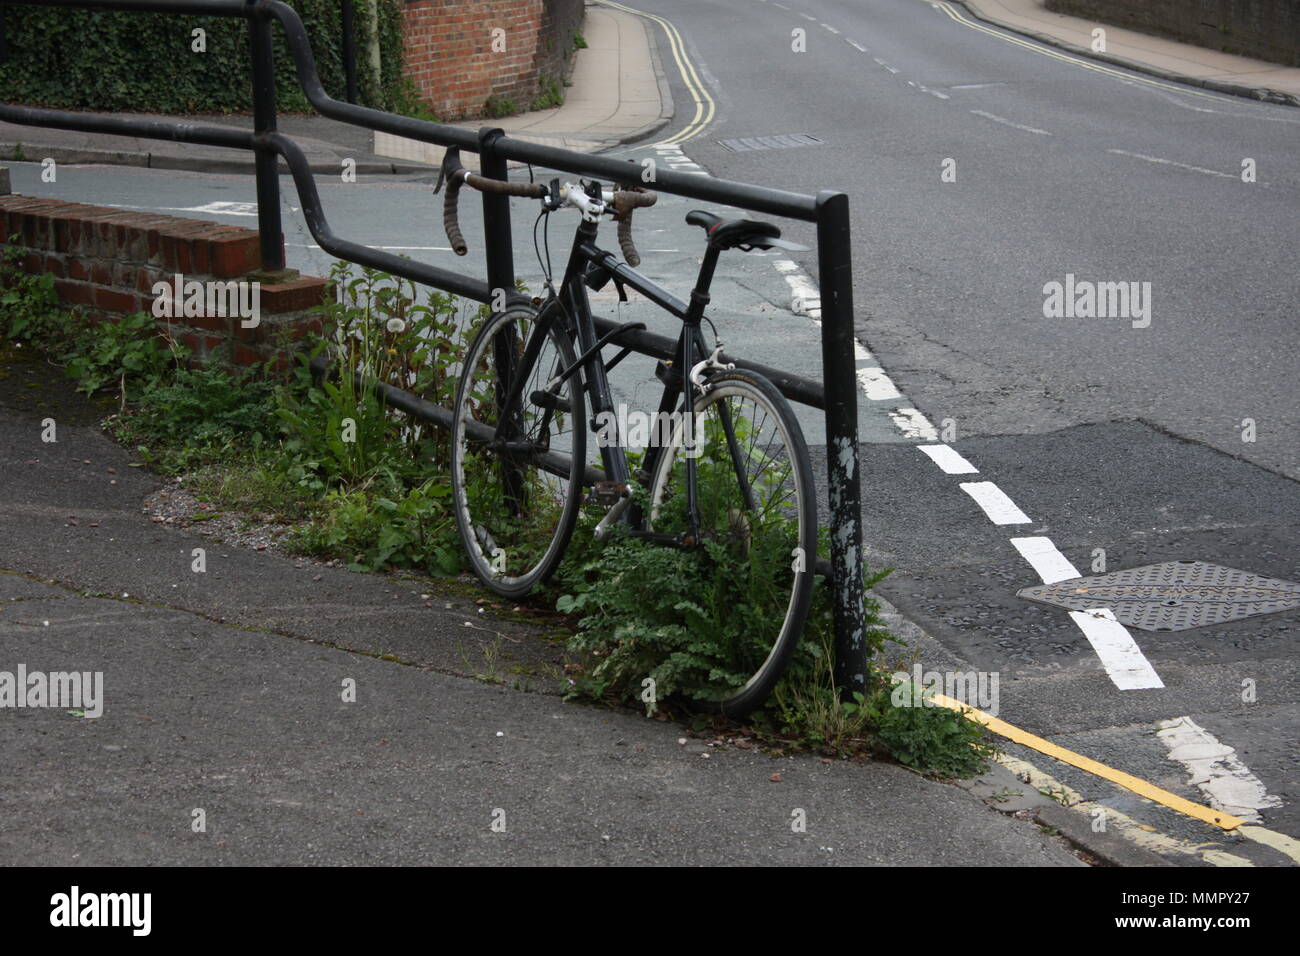 A bike leans, lonely against the side of the road, weeds poking up through its spokes in a snapshot of urban life. Stock Photo